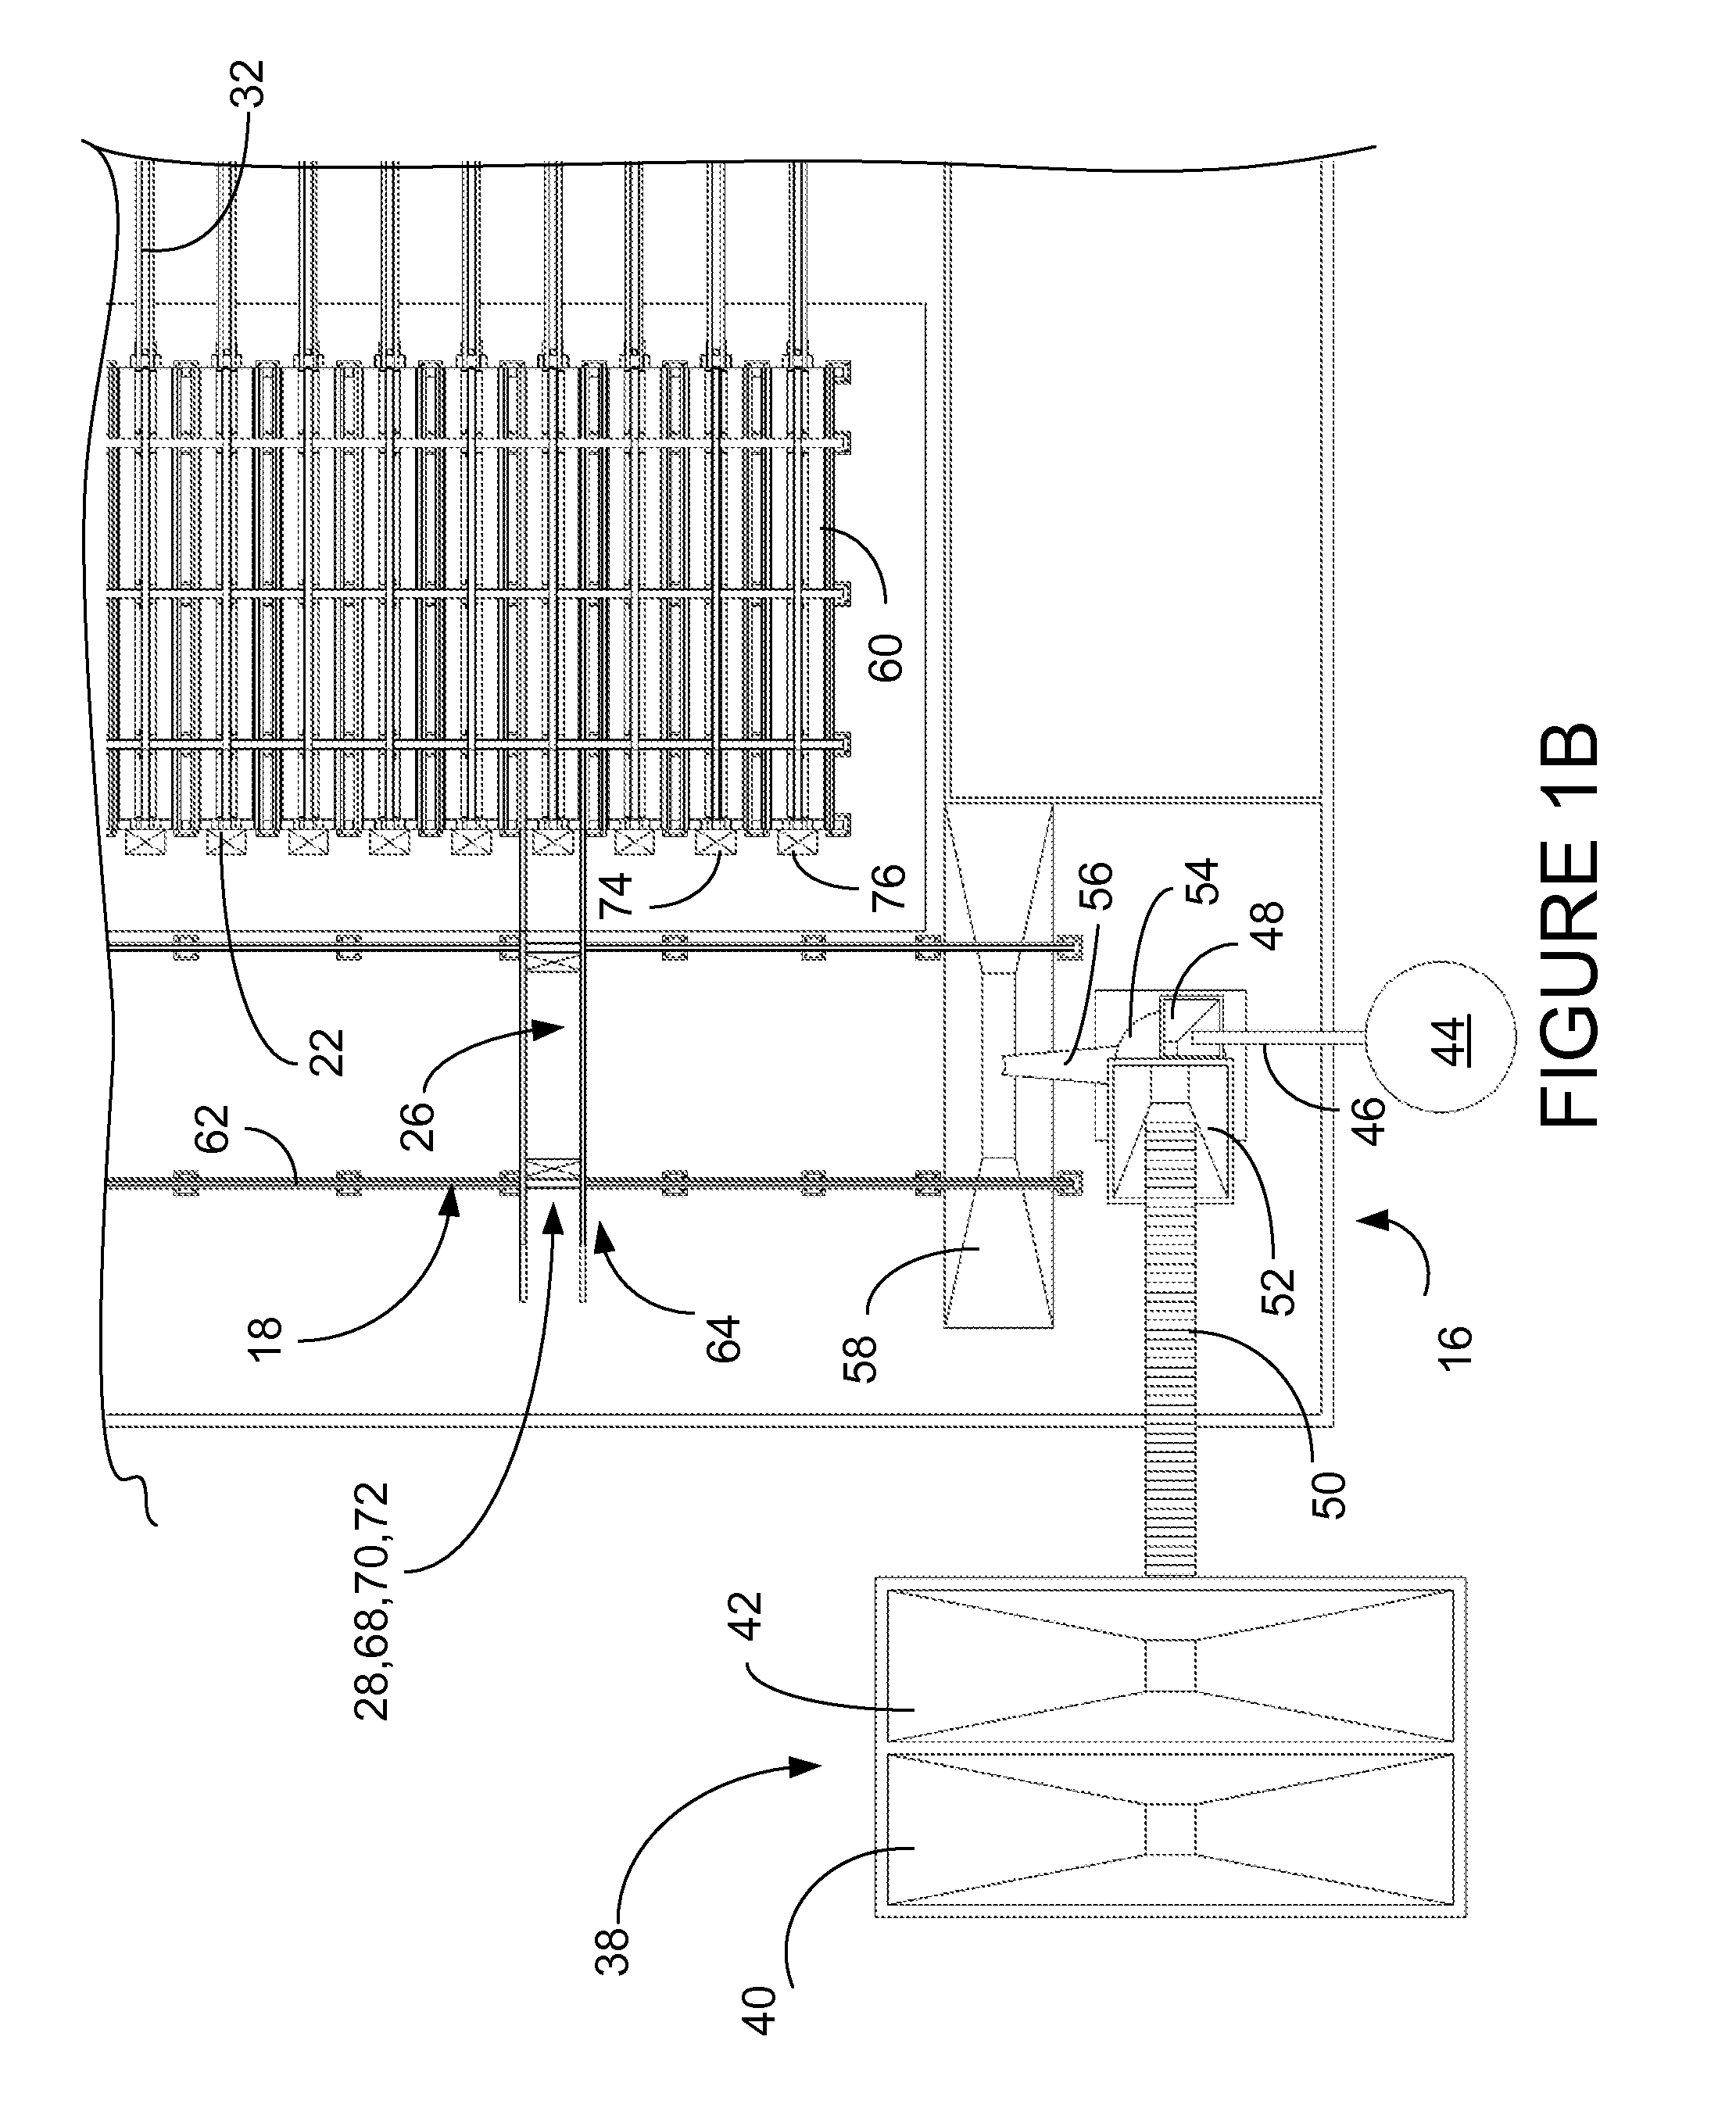 Automated concrete structural member fabrication method